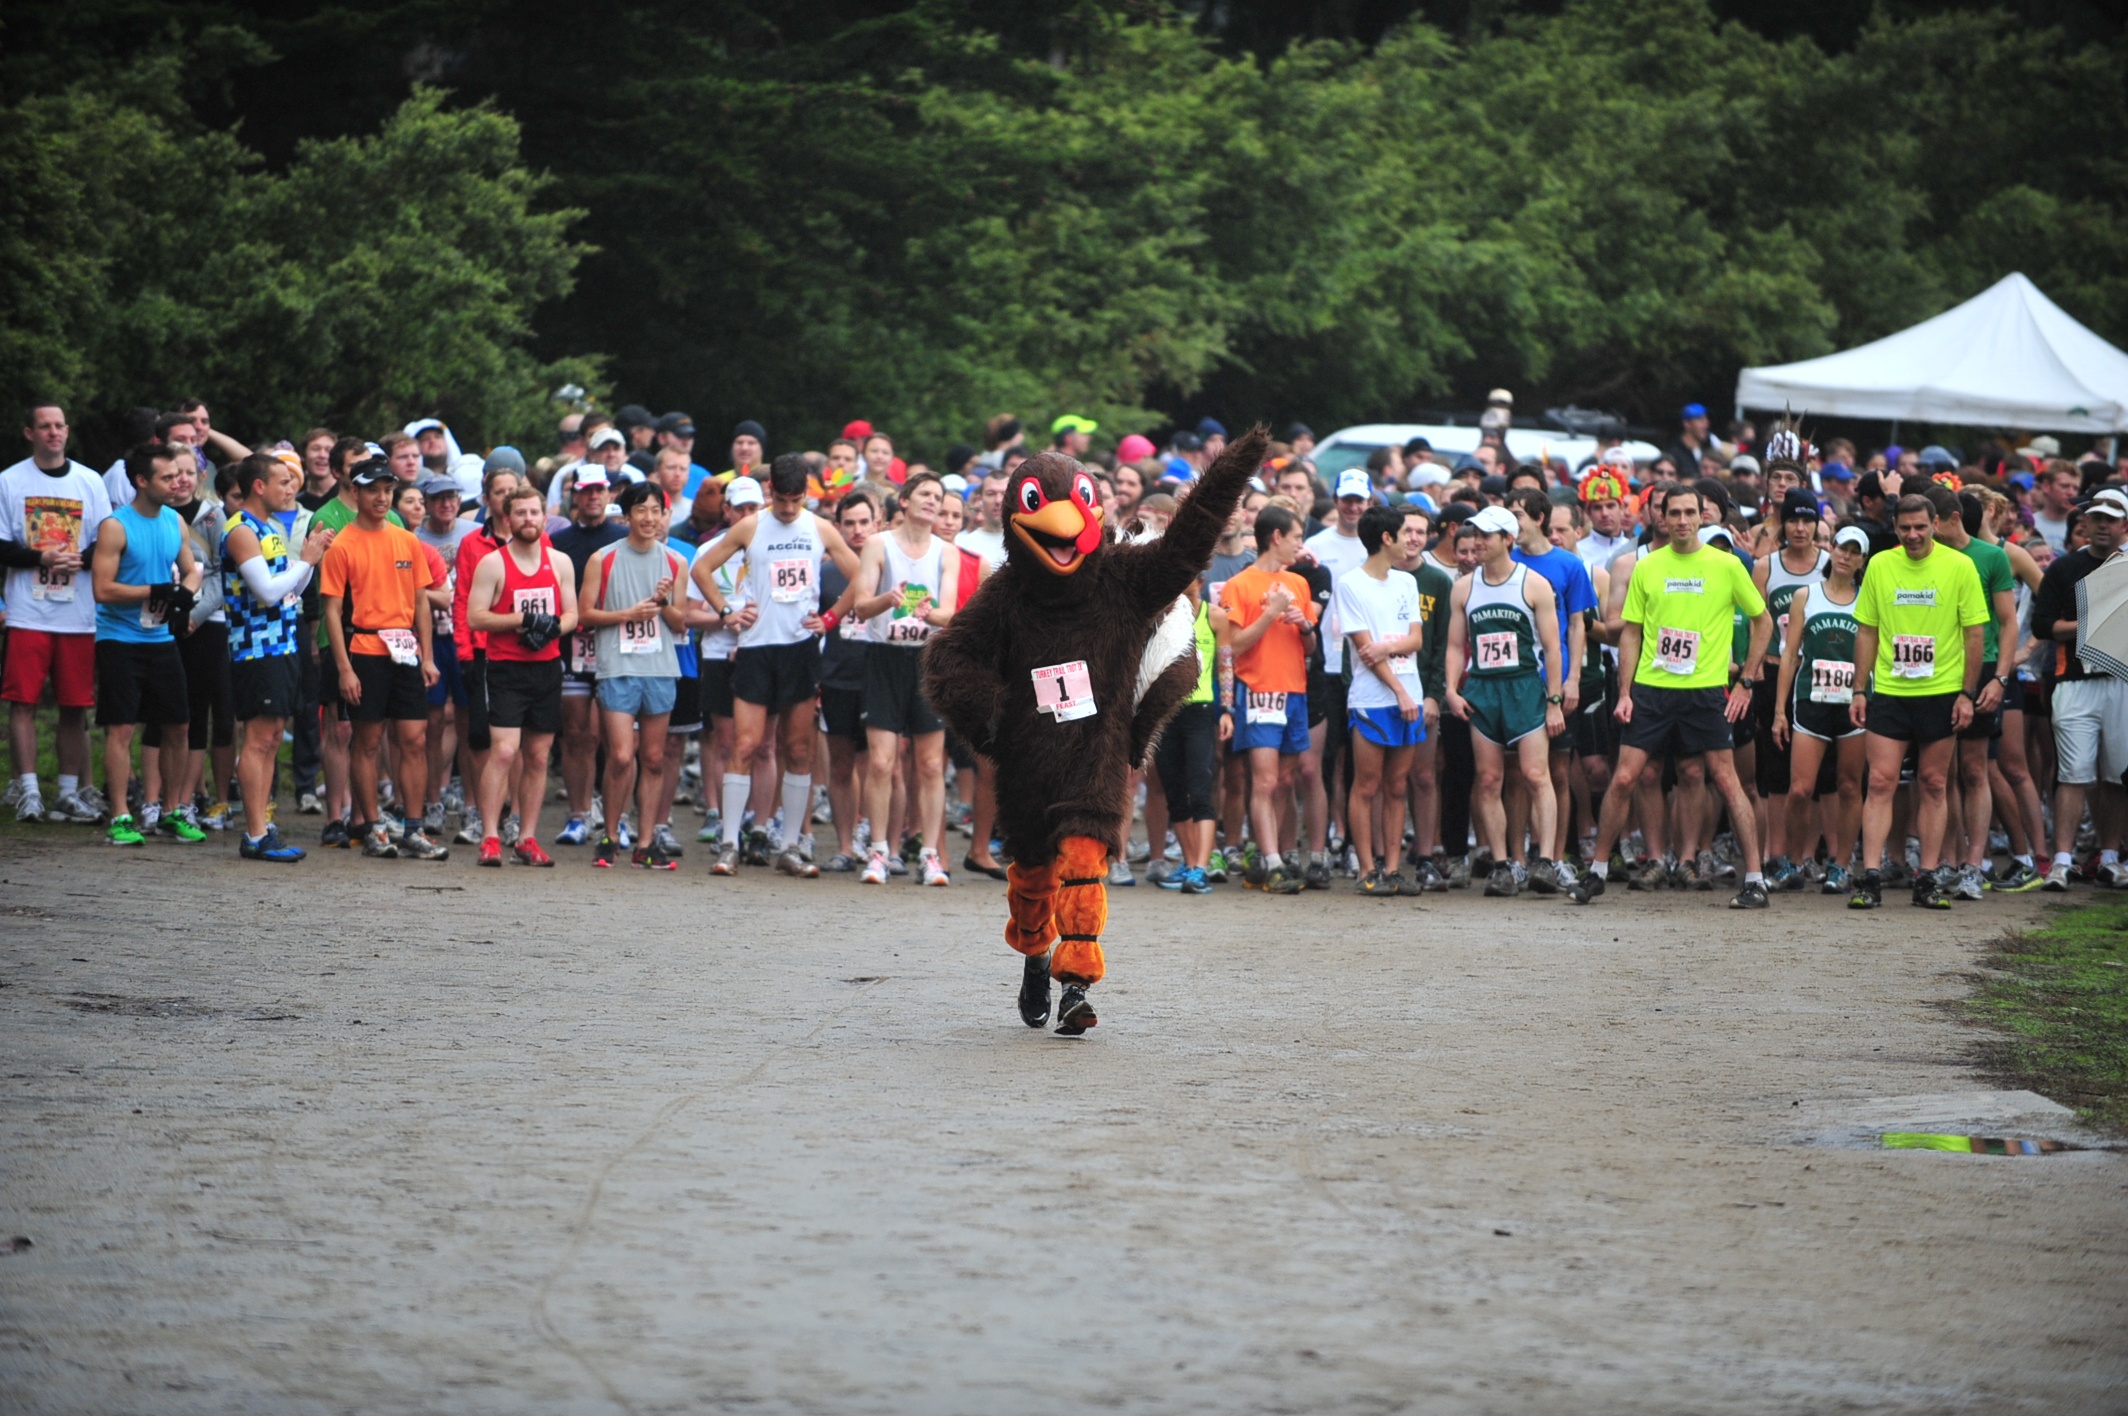 A turkey mascot leads a pack of runners on a Thanksgiving run outdoors.